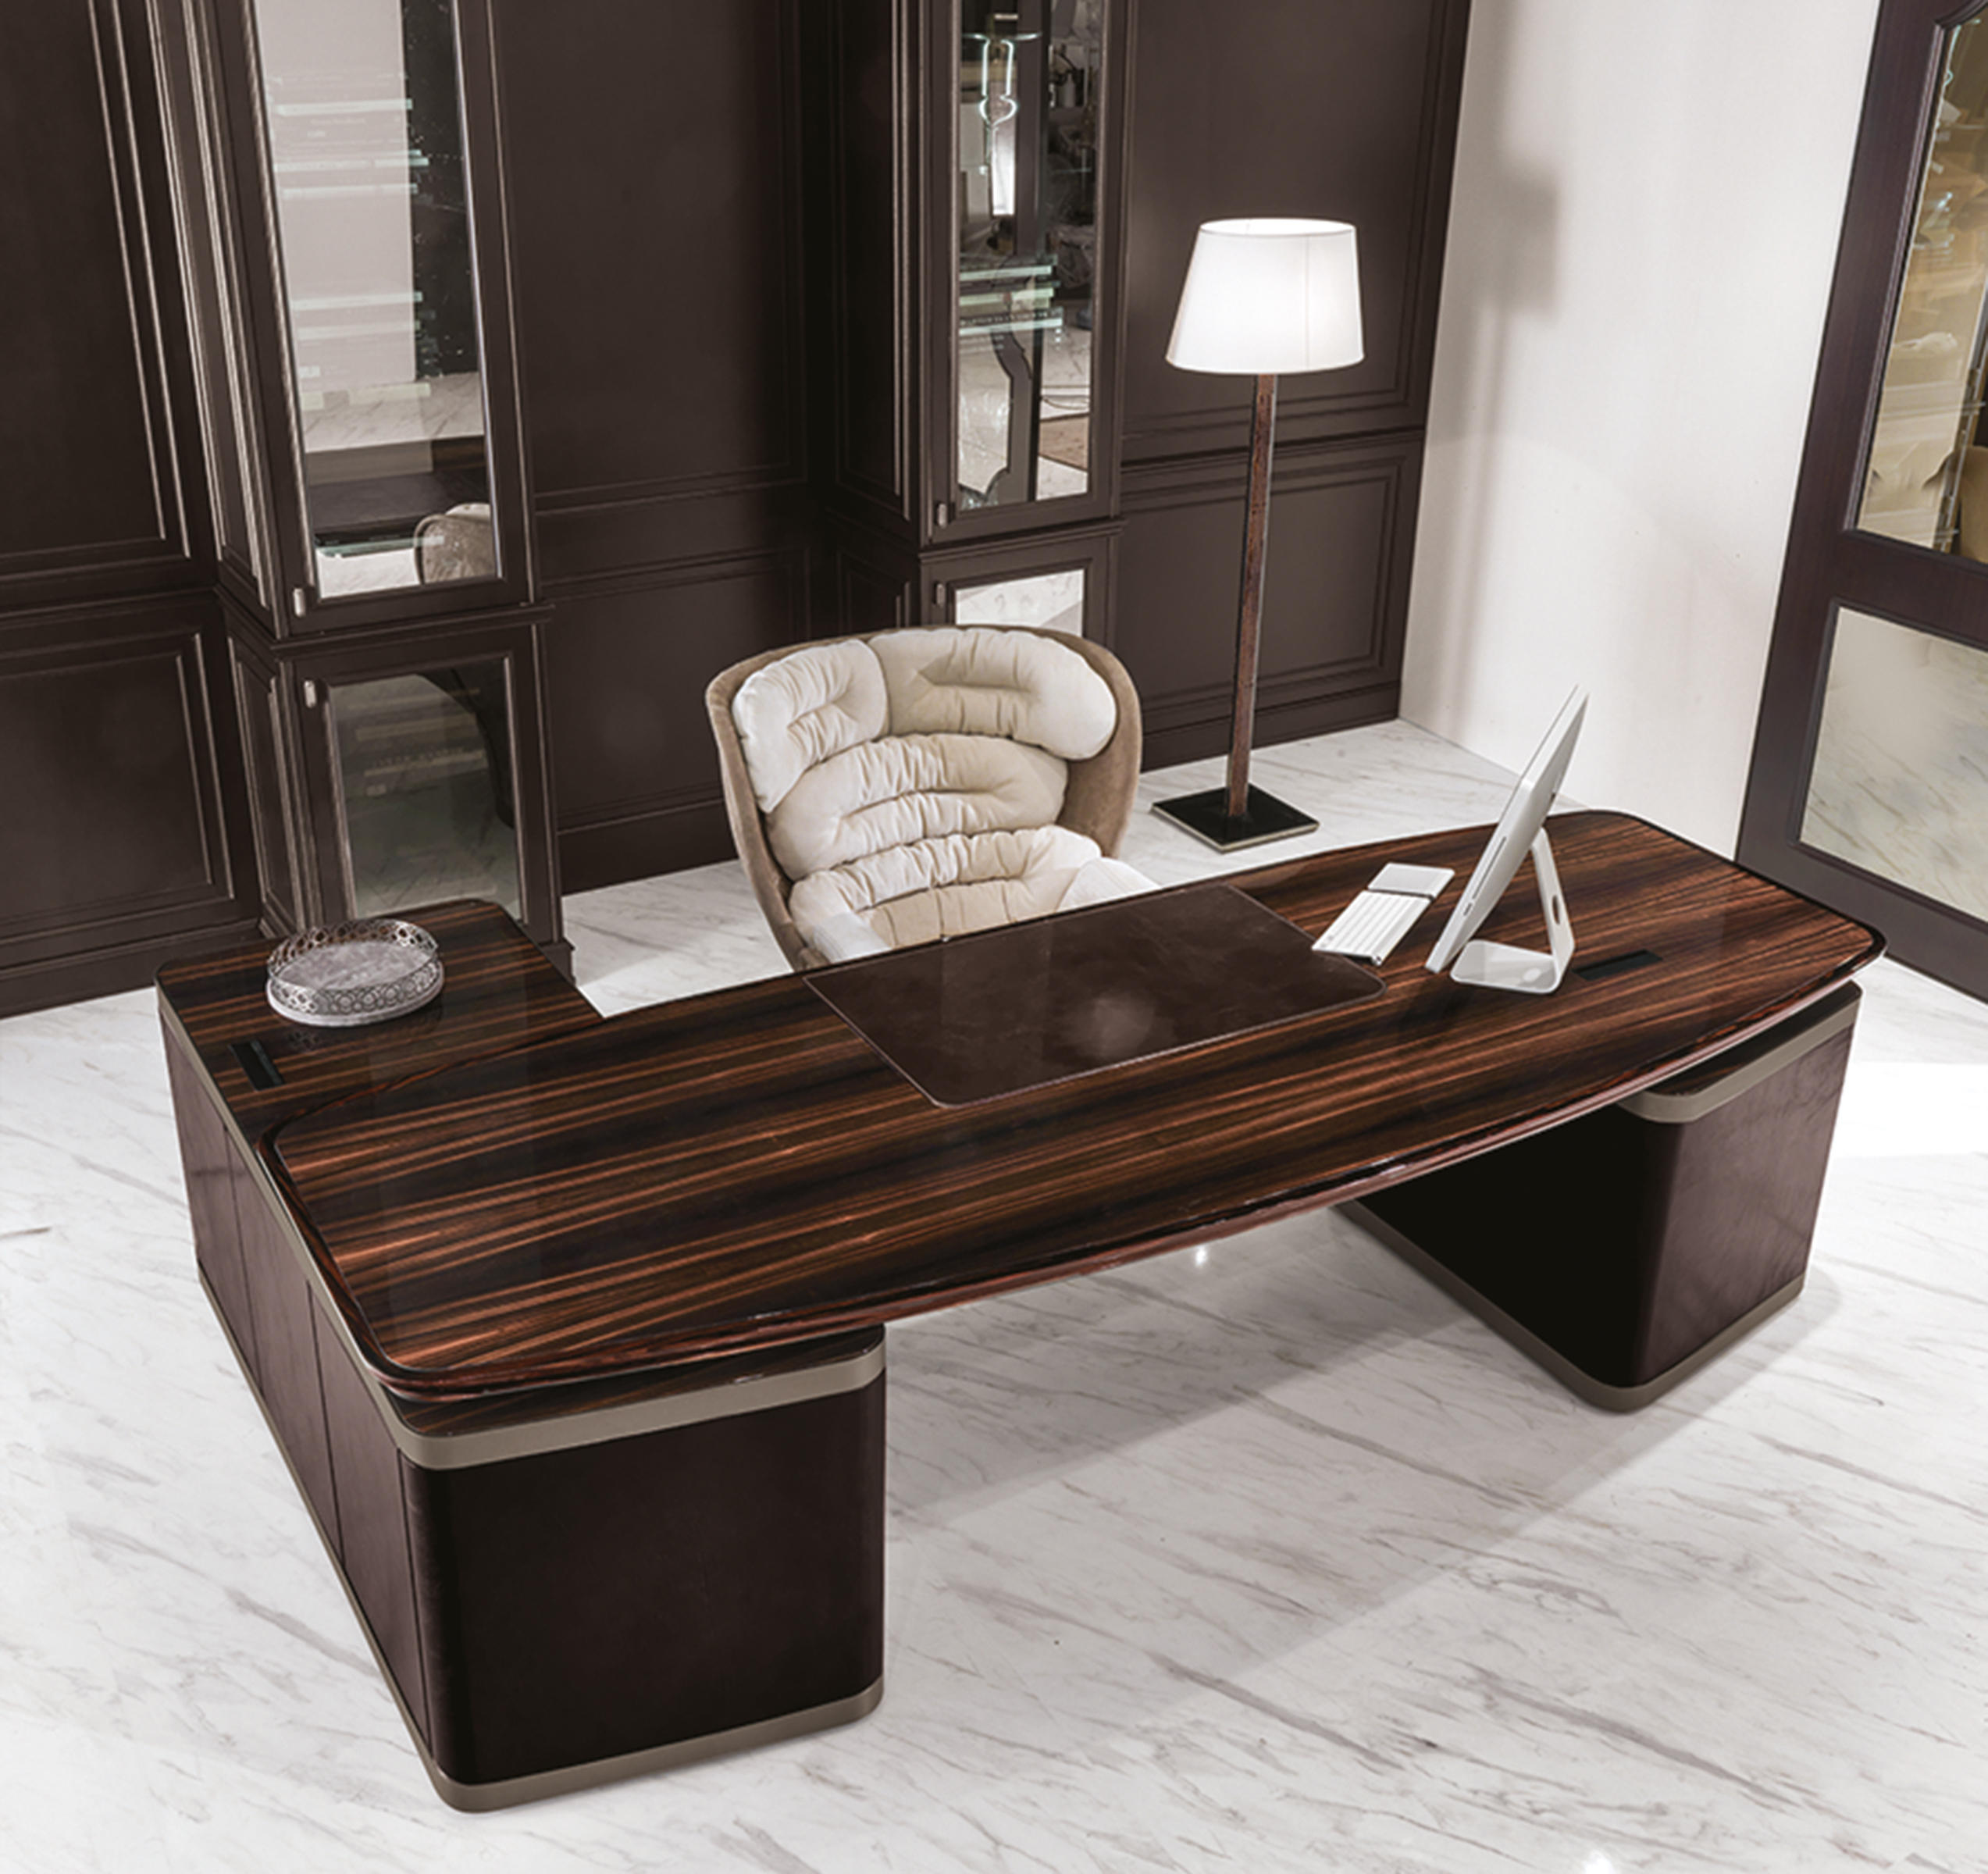 ECTOR DESK - Desks from Longhi S.p.a. | Architonic